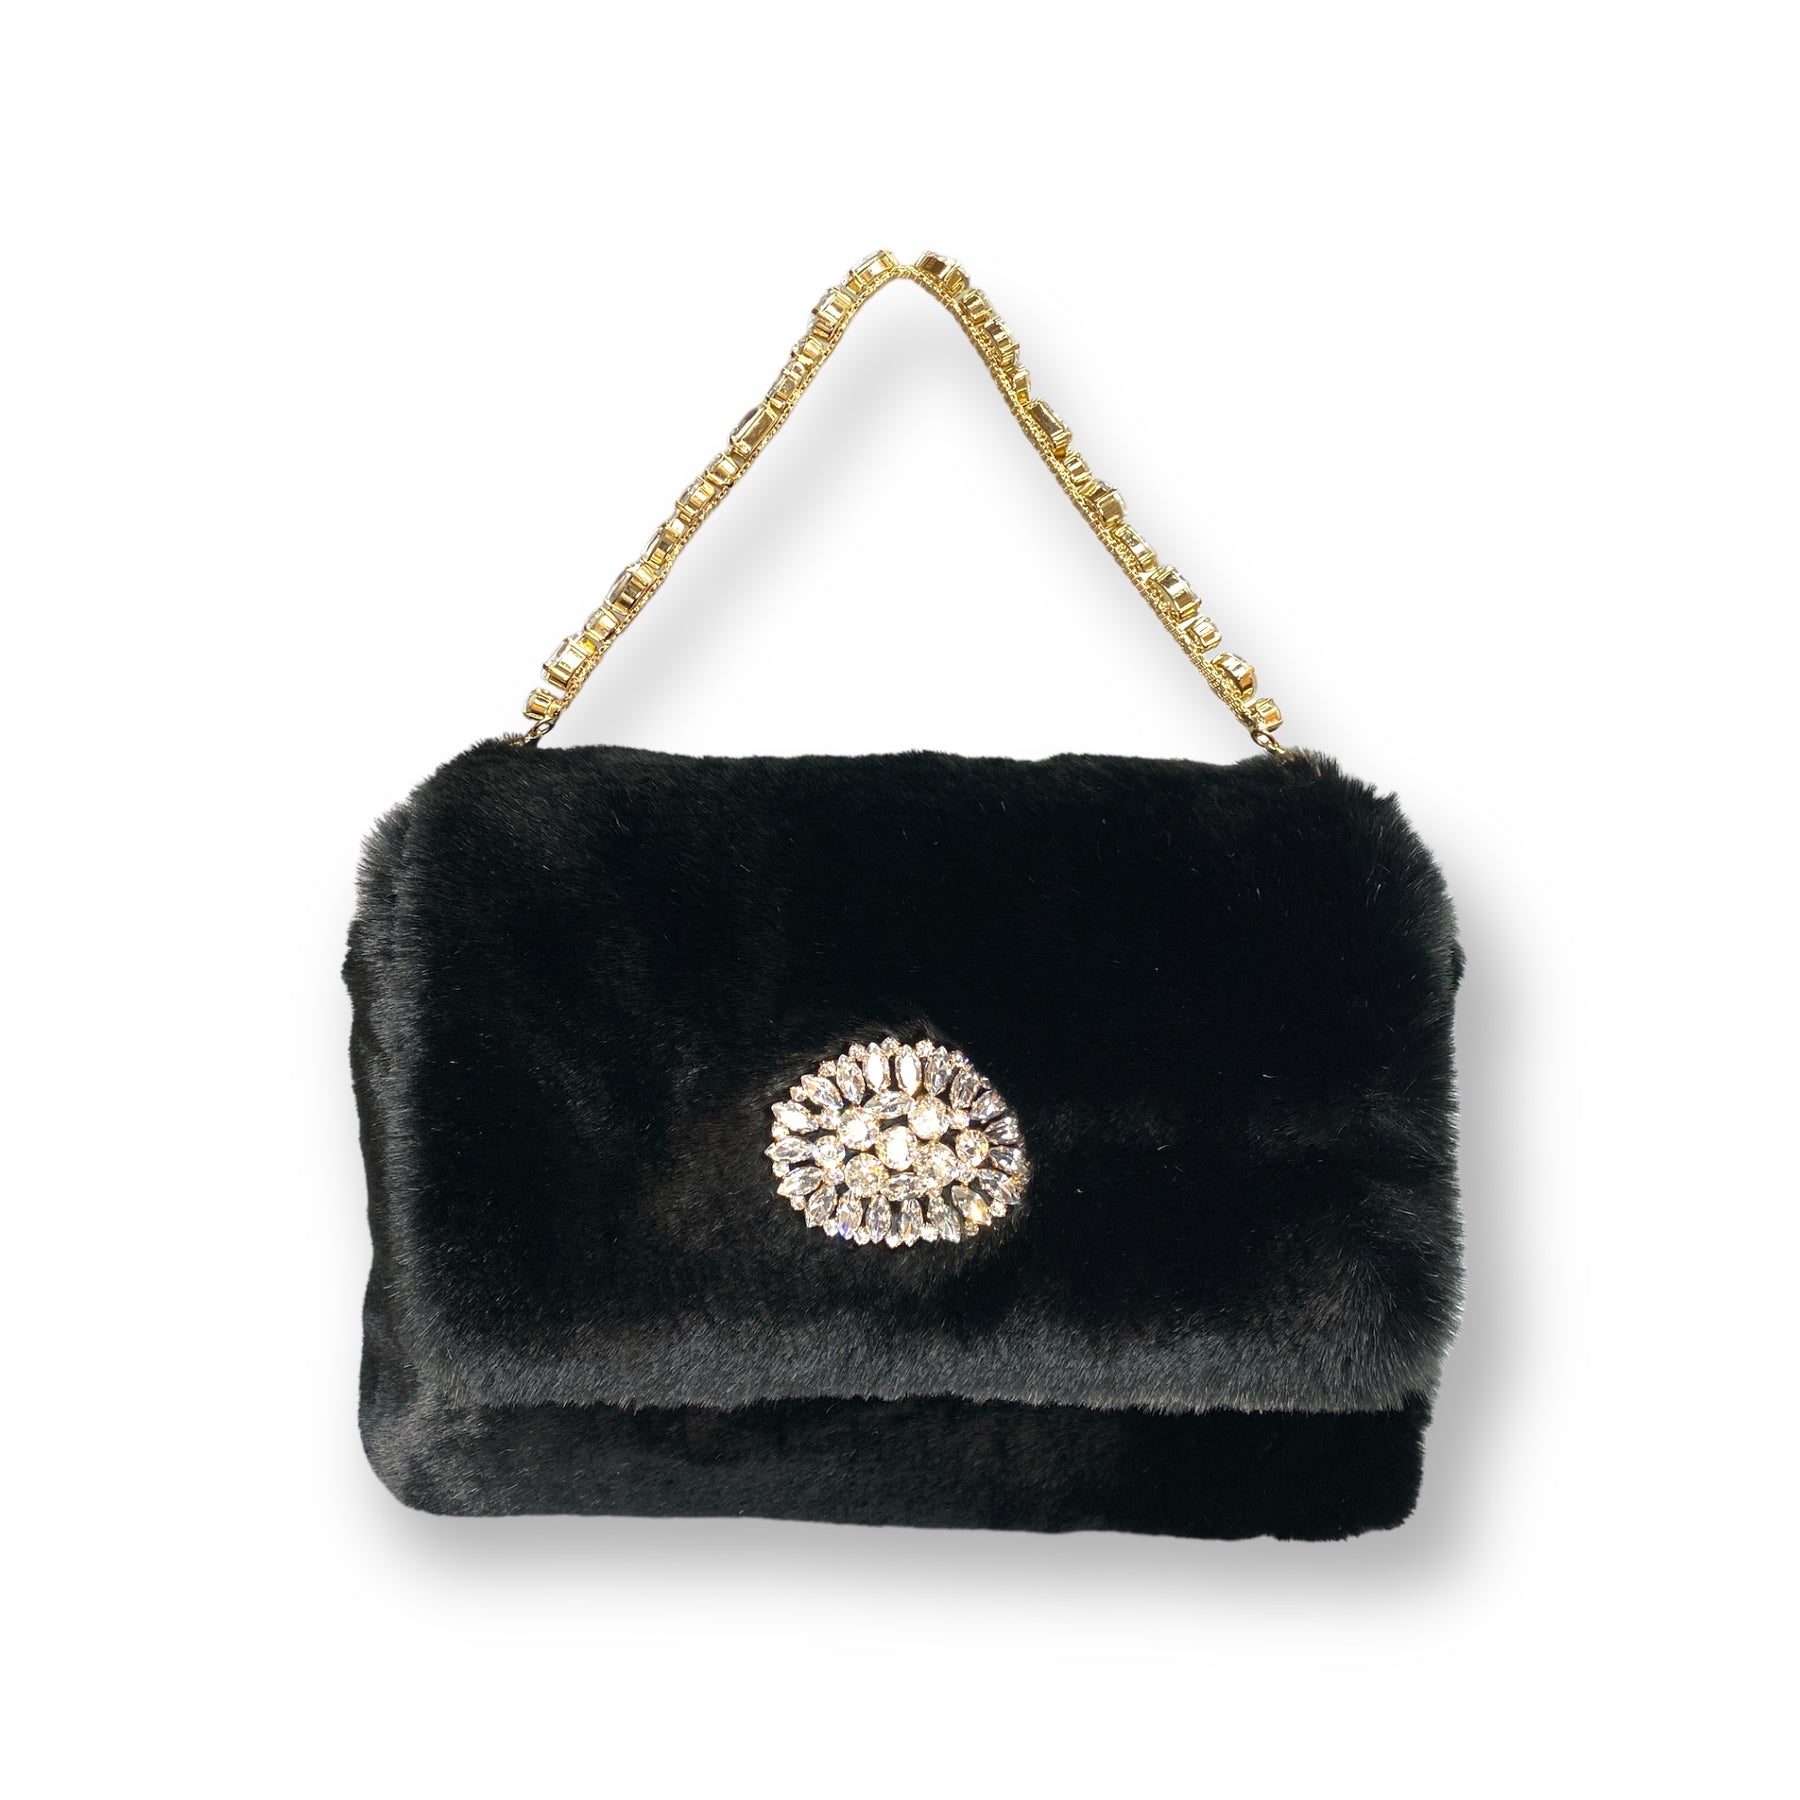 Furry Purse for Girls Heart Shaped Fluffy Handbag for Women Soft Small  Shoulder Bag Clutch Purse with Metal Chain Strap . The Best Valentines'  gifts For Girlfriend Lady & Woman. Perfect for